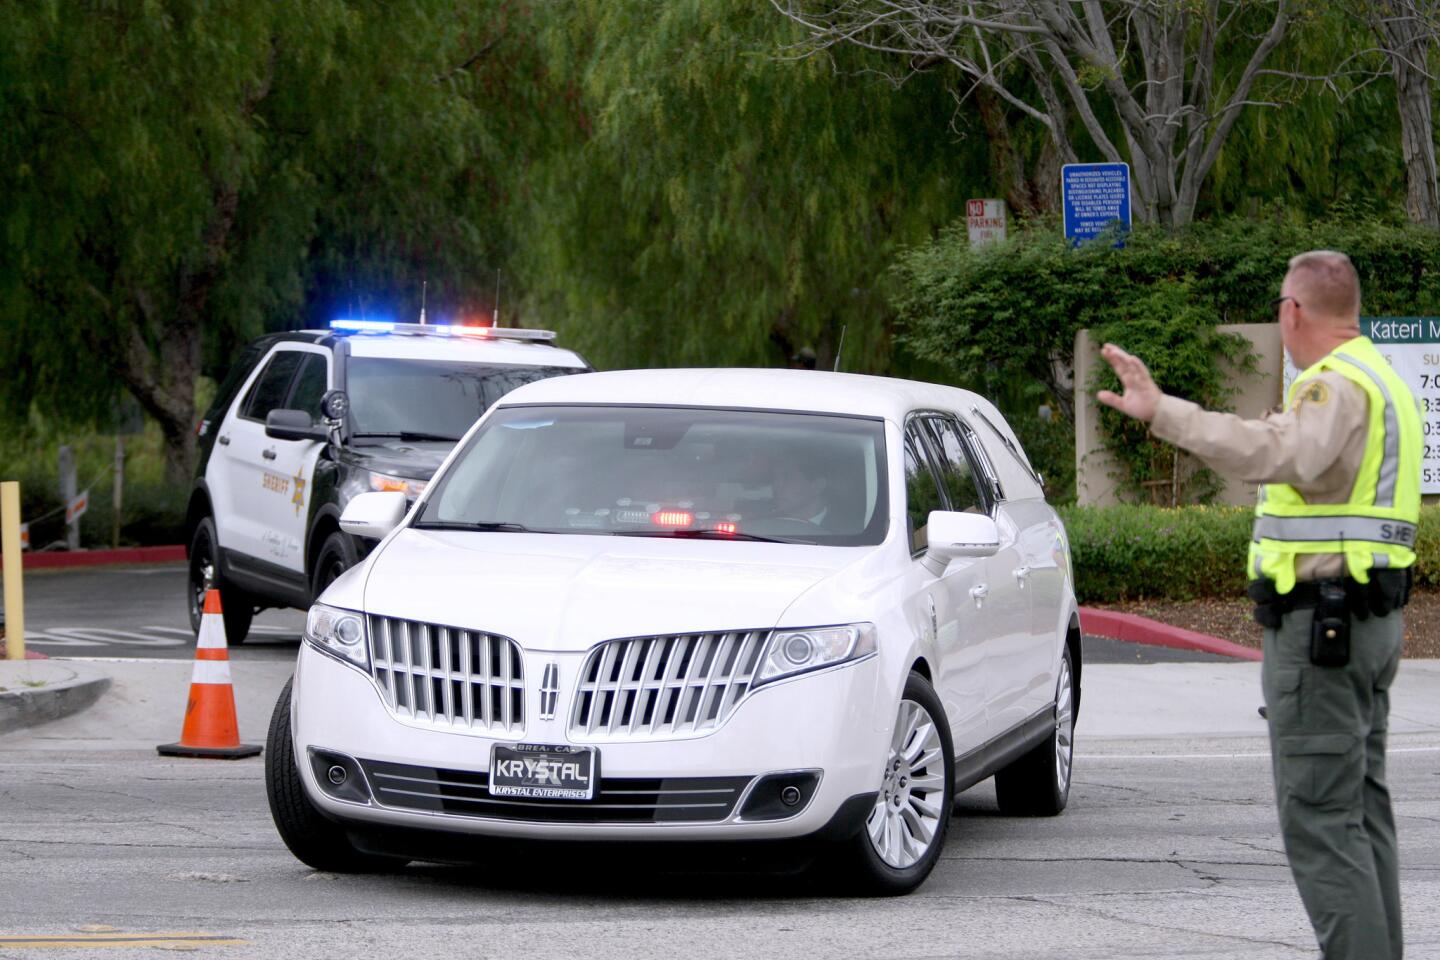 A hearse is escorted out after memorial service for Cecilia Hoschet at St. Kateri Tekakwitha Catholic Church in the city of Santa Clarita on Wednesday, Sept. 16, 2015. Hoschet was allegedly killed by her husband at their La Cañada Flintridge home recently and then he committed suicide.